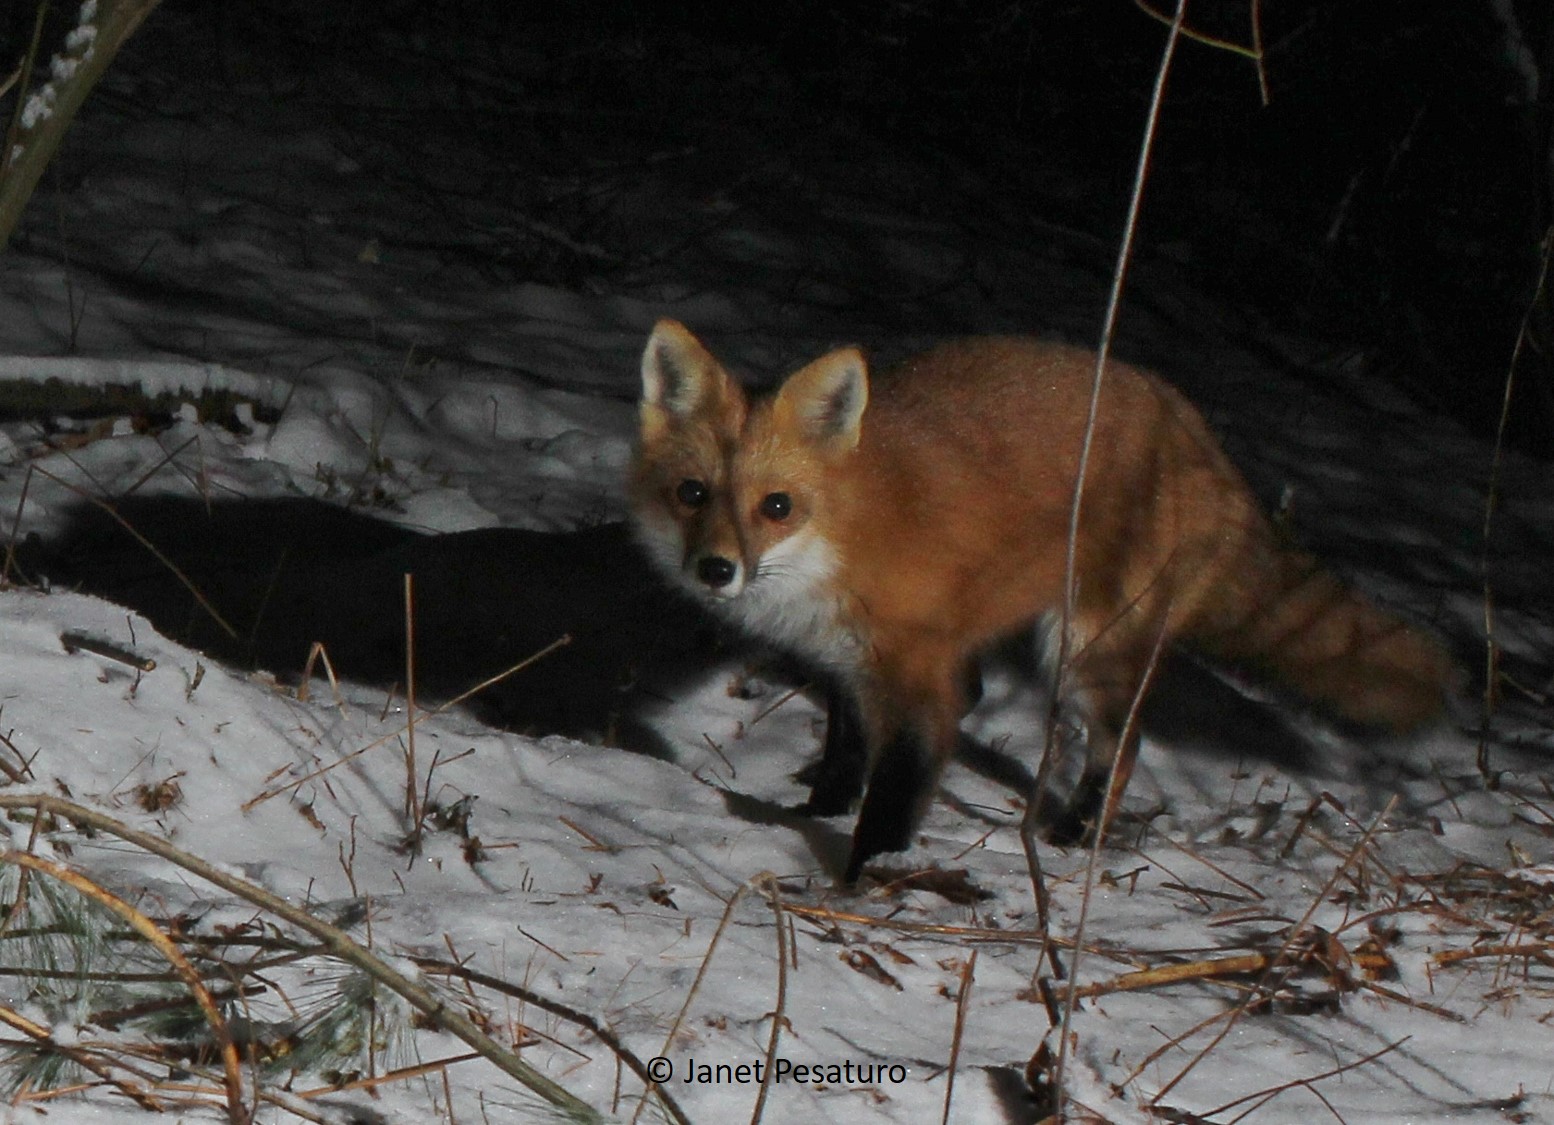 red fox, one of many species featured in this trail camera video montage.